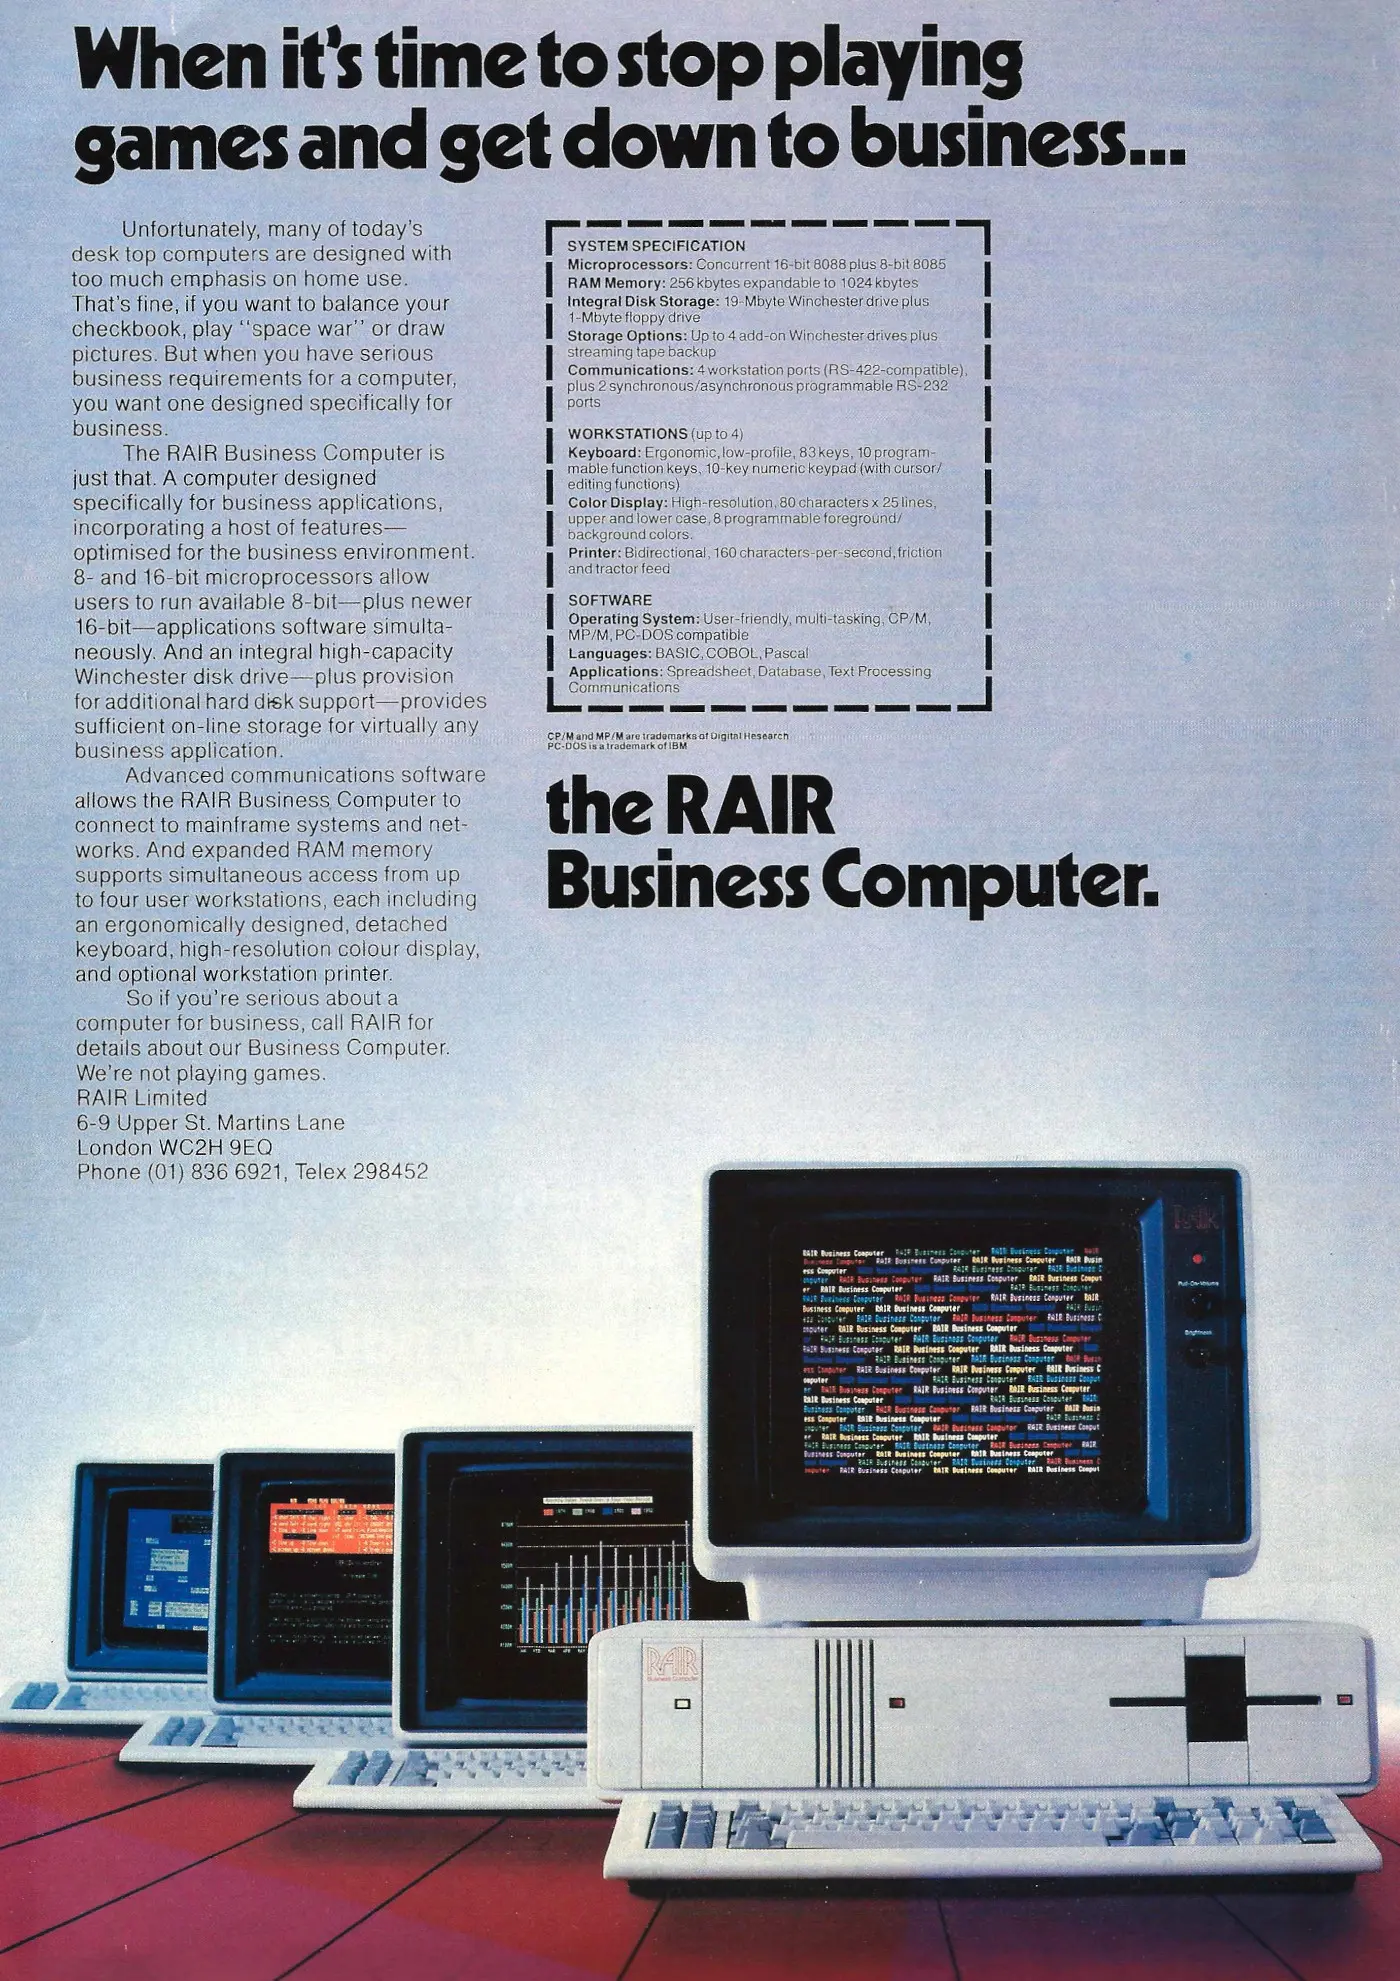 RAIR Advert: RAIR: When it's time to stop playing games and get down to business, from Practical Computing, June 1983